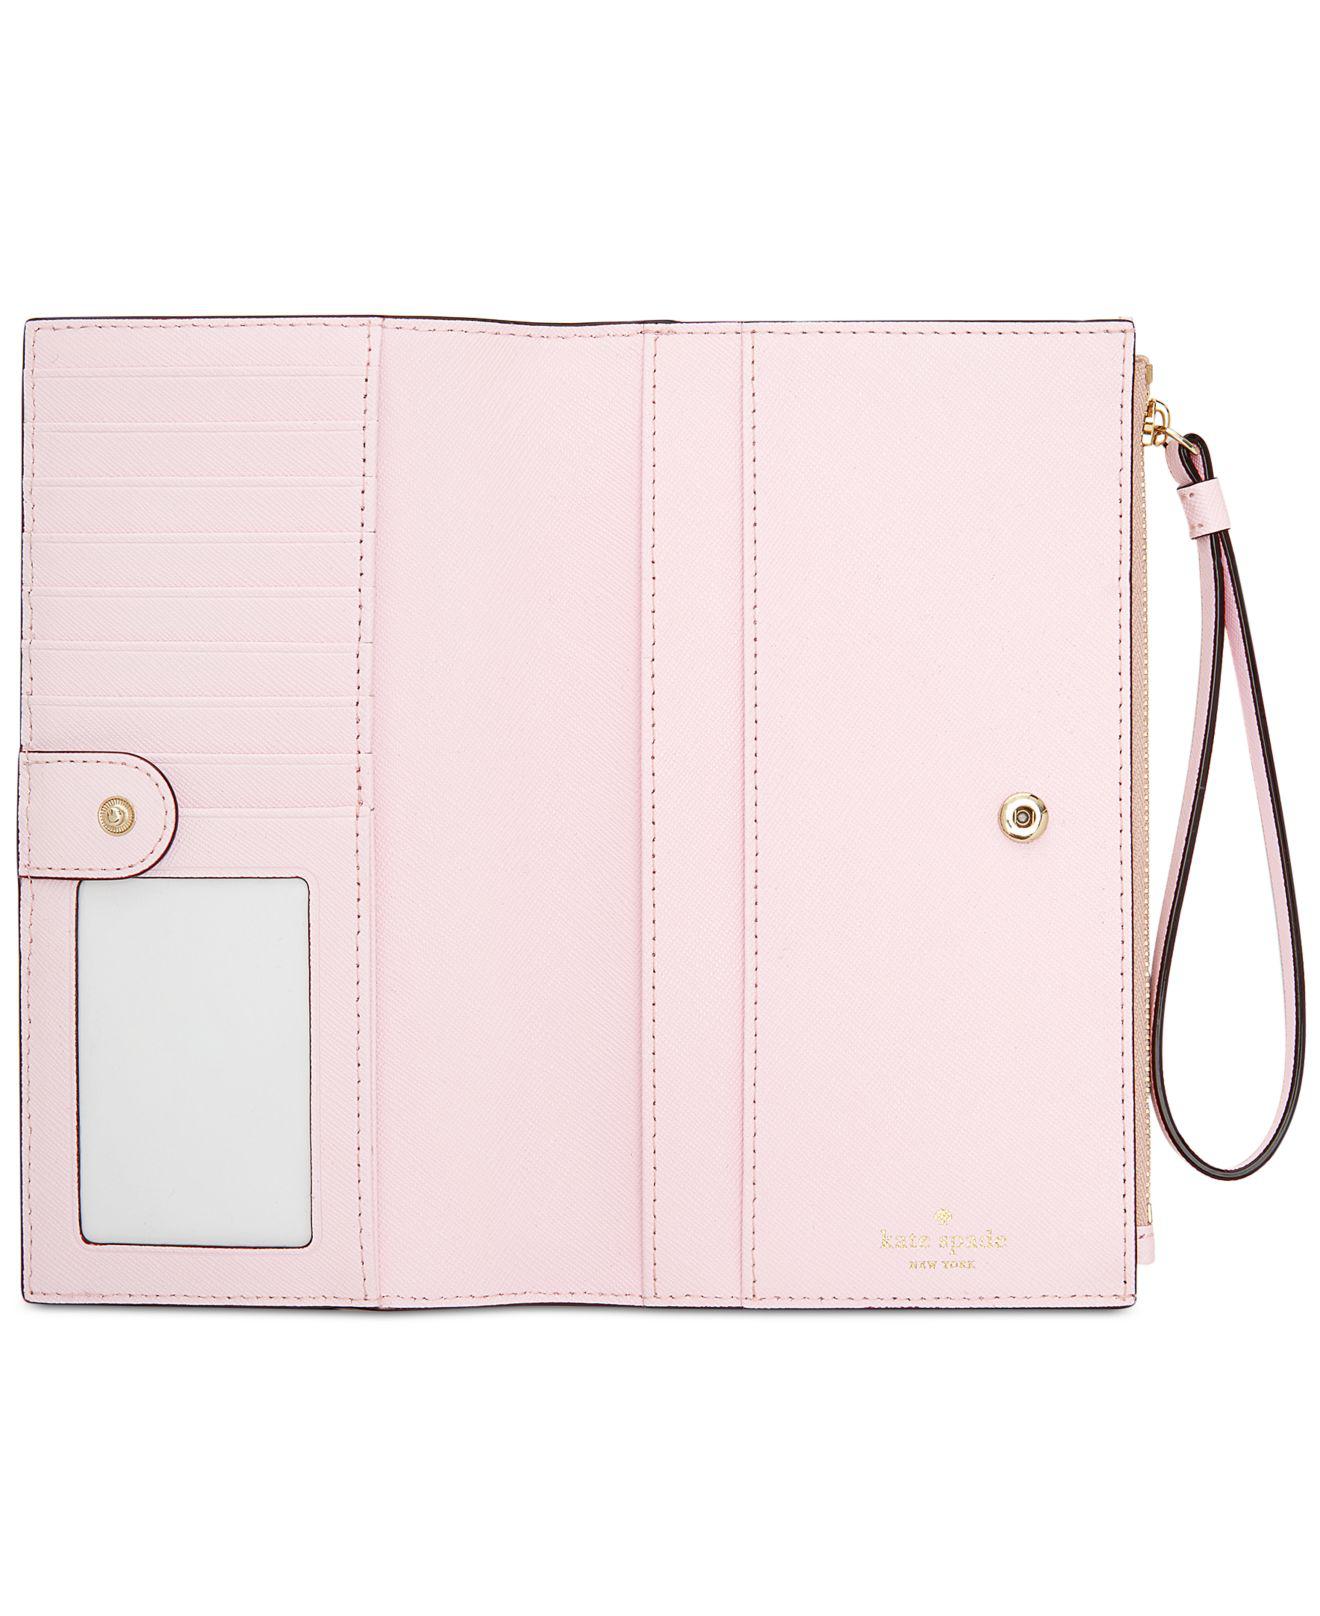 special offers & promotions here Kate Spade Wristlet/Wallet Outlet ...